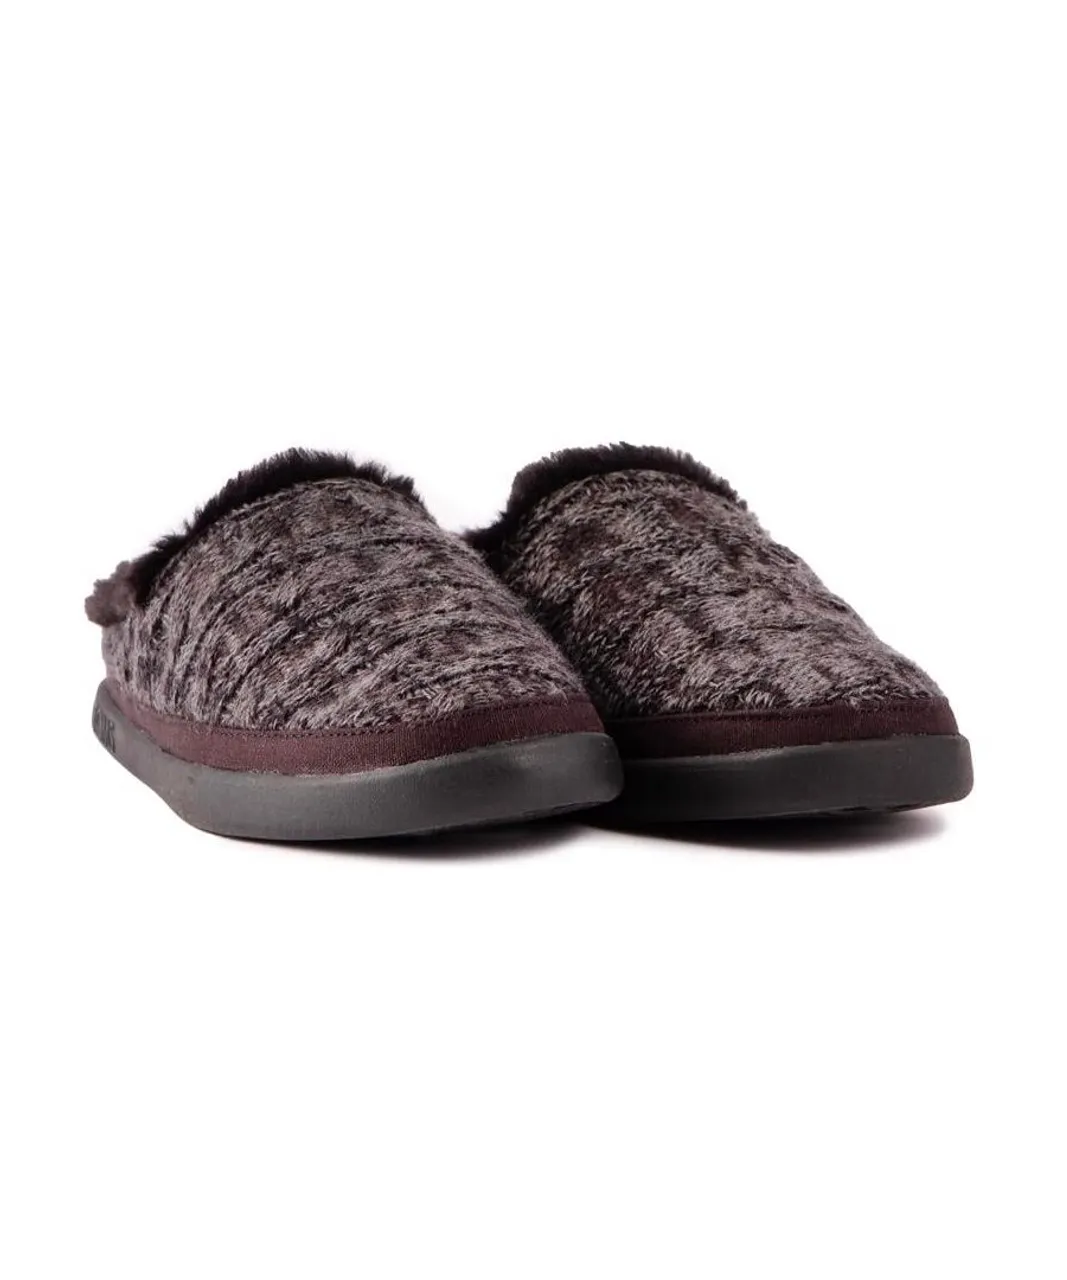 Toms Womens Sage Slippers - Black